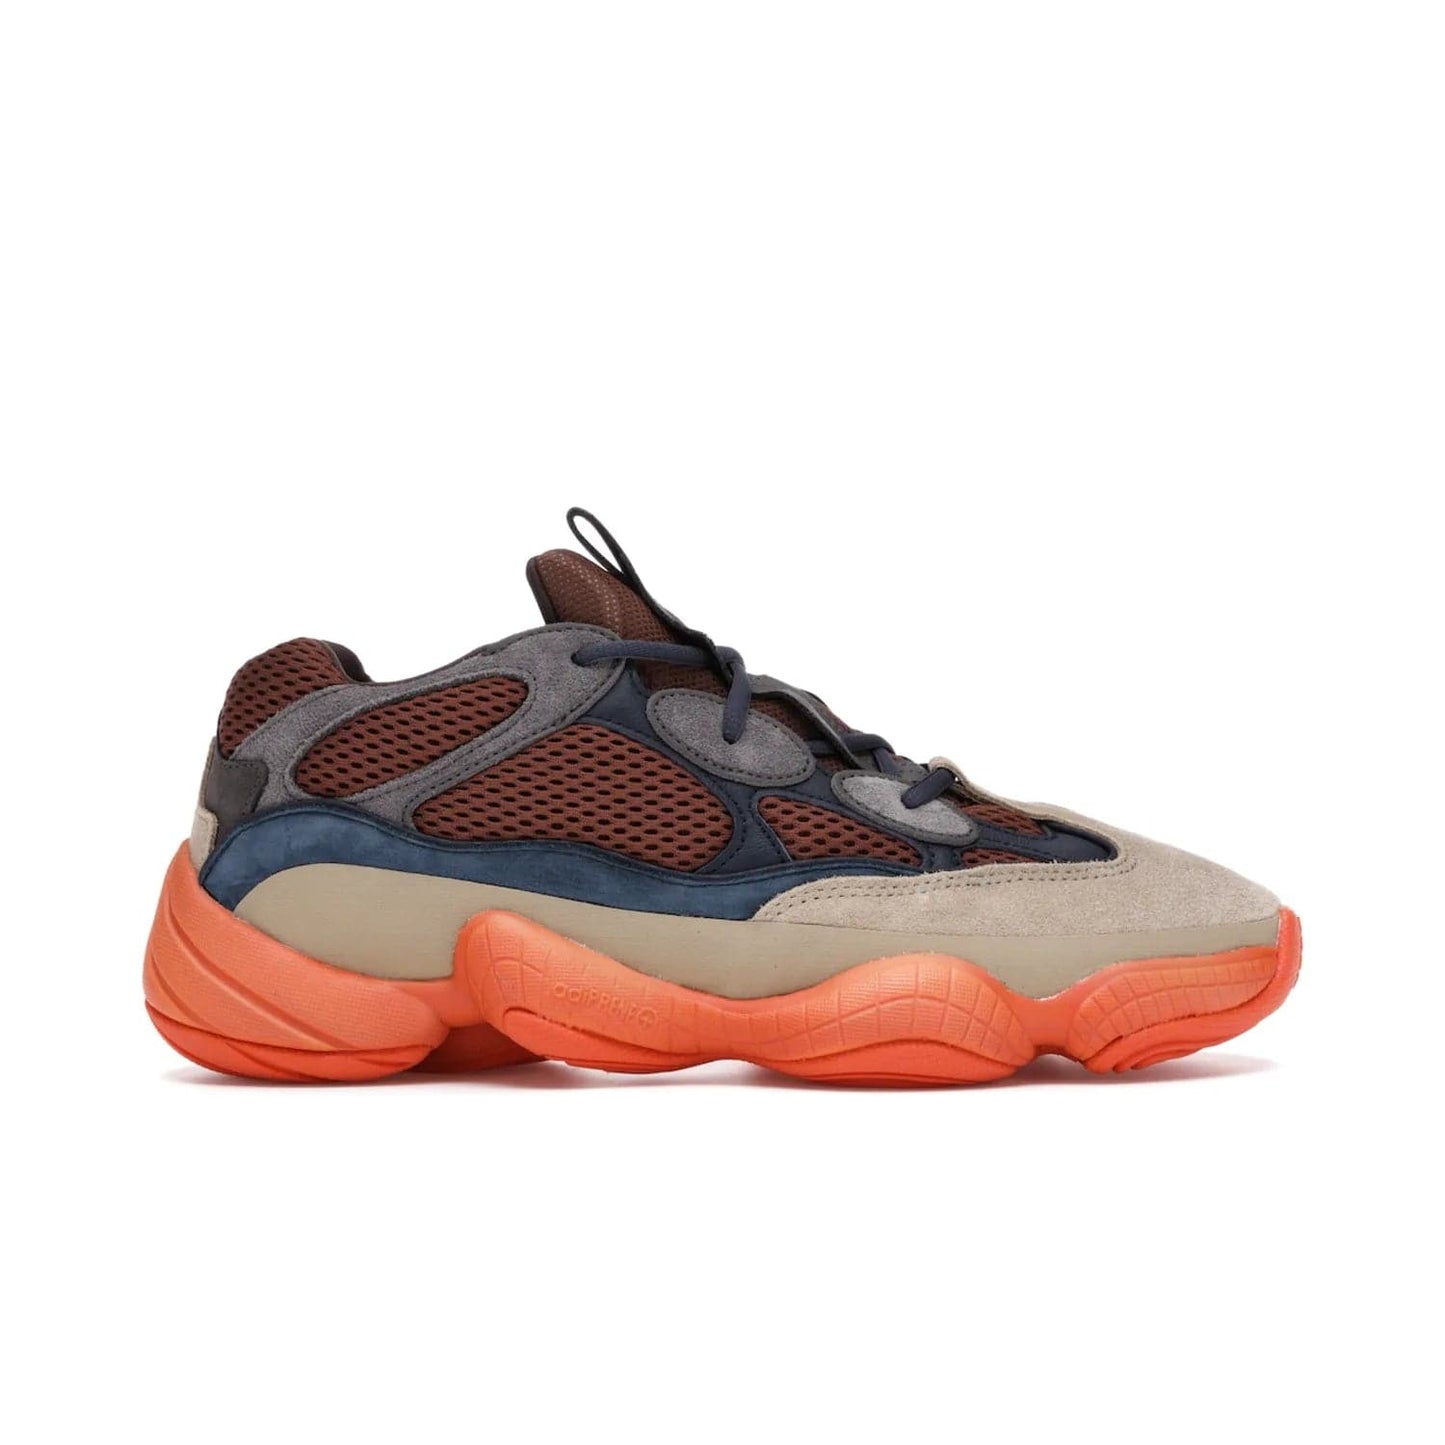 adidas Yeezy 500 Enflame - Image 1 - Only at www.BallersClubKickz.com - Step into style with the adidas Yeezy 500 Enflame. Mix of mesh, leather, and suede layered together to create tonal-brown, dark blue, & orange. Orange AdiPRENE sole provides superior cushioning & comfort. Get yours and experience maximum style.